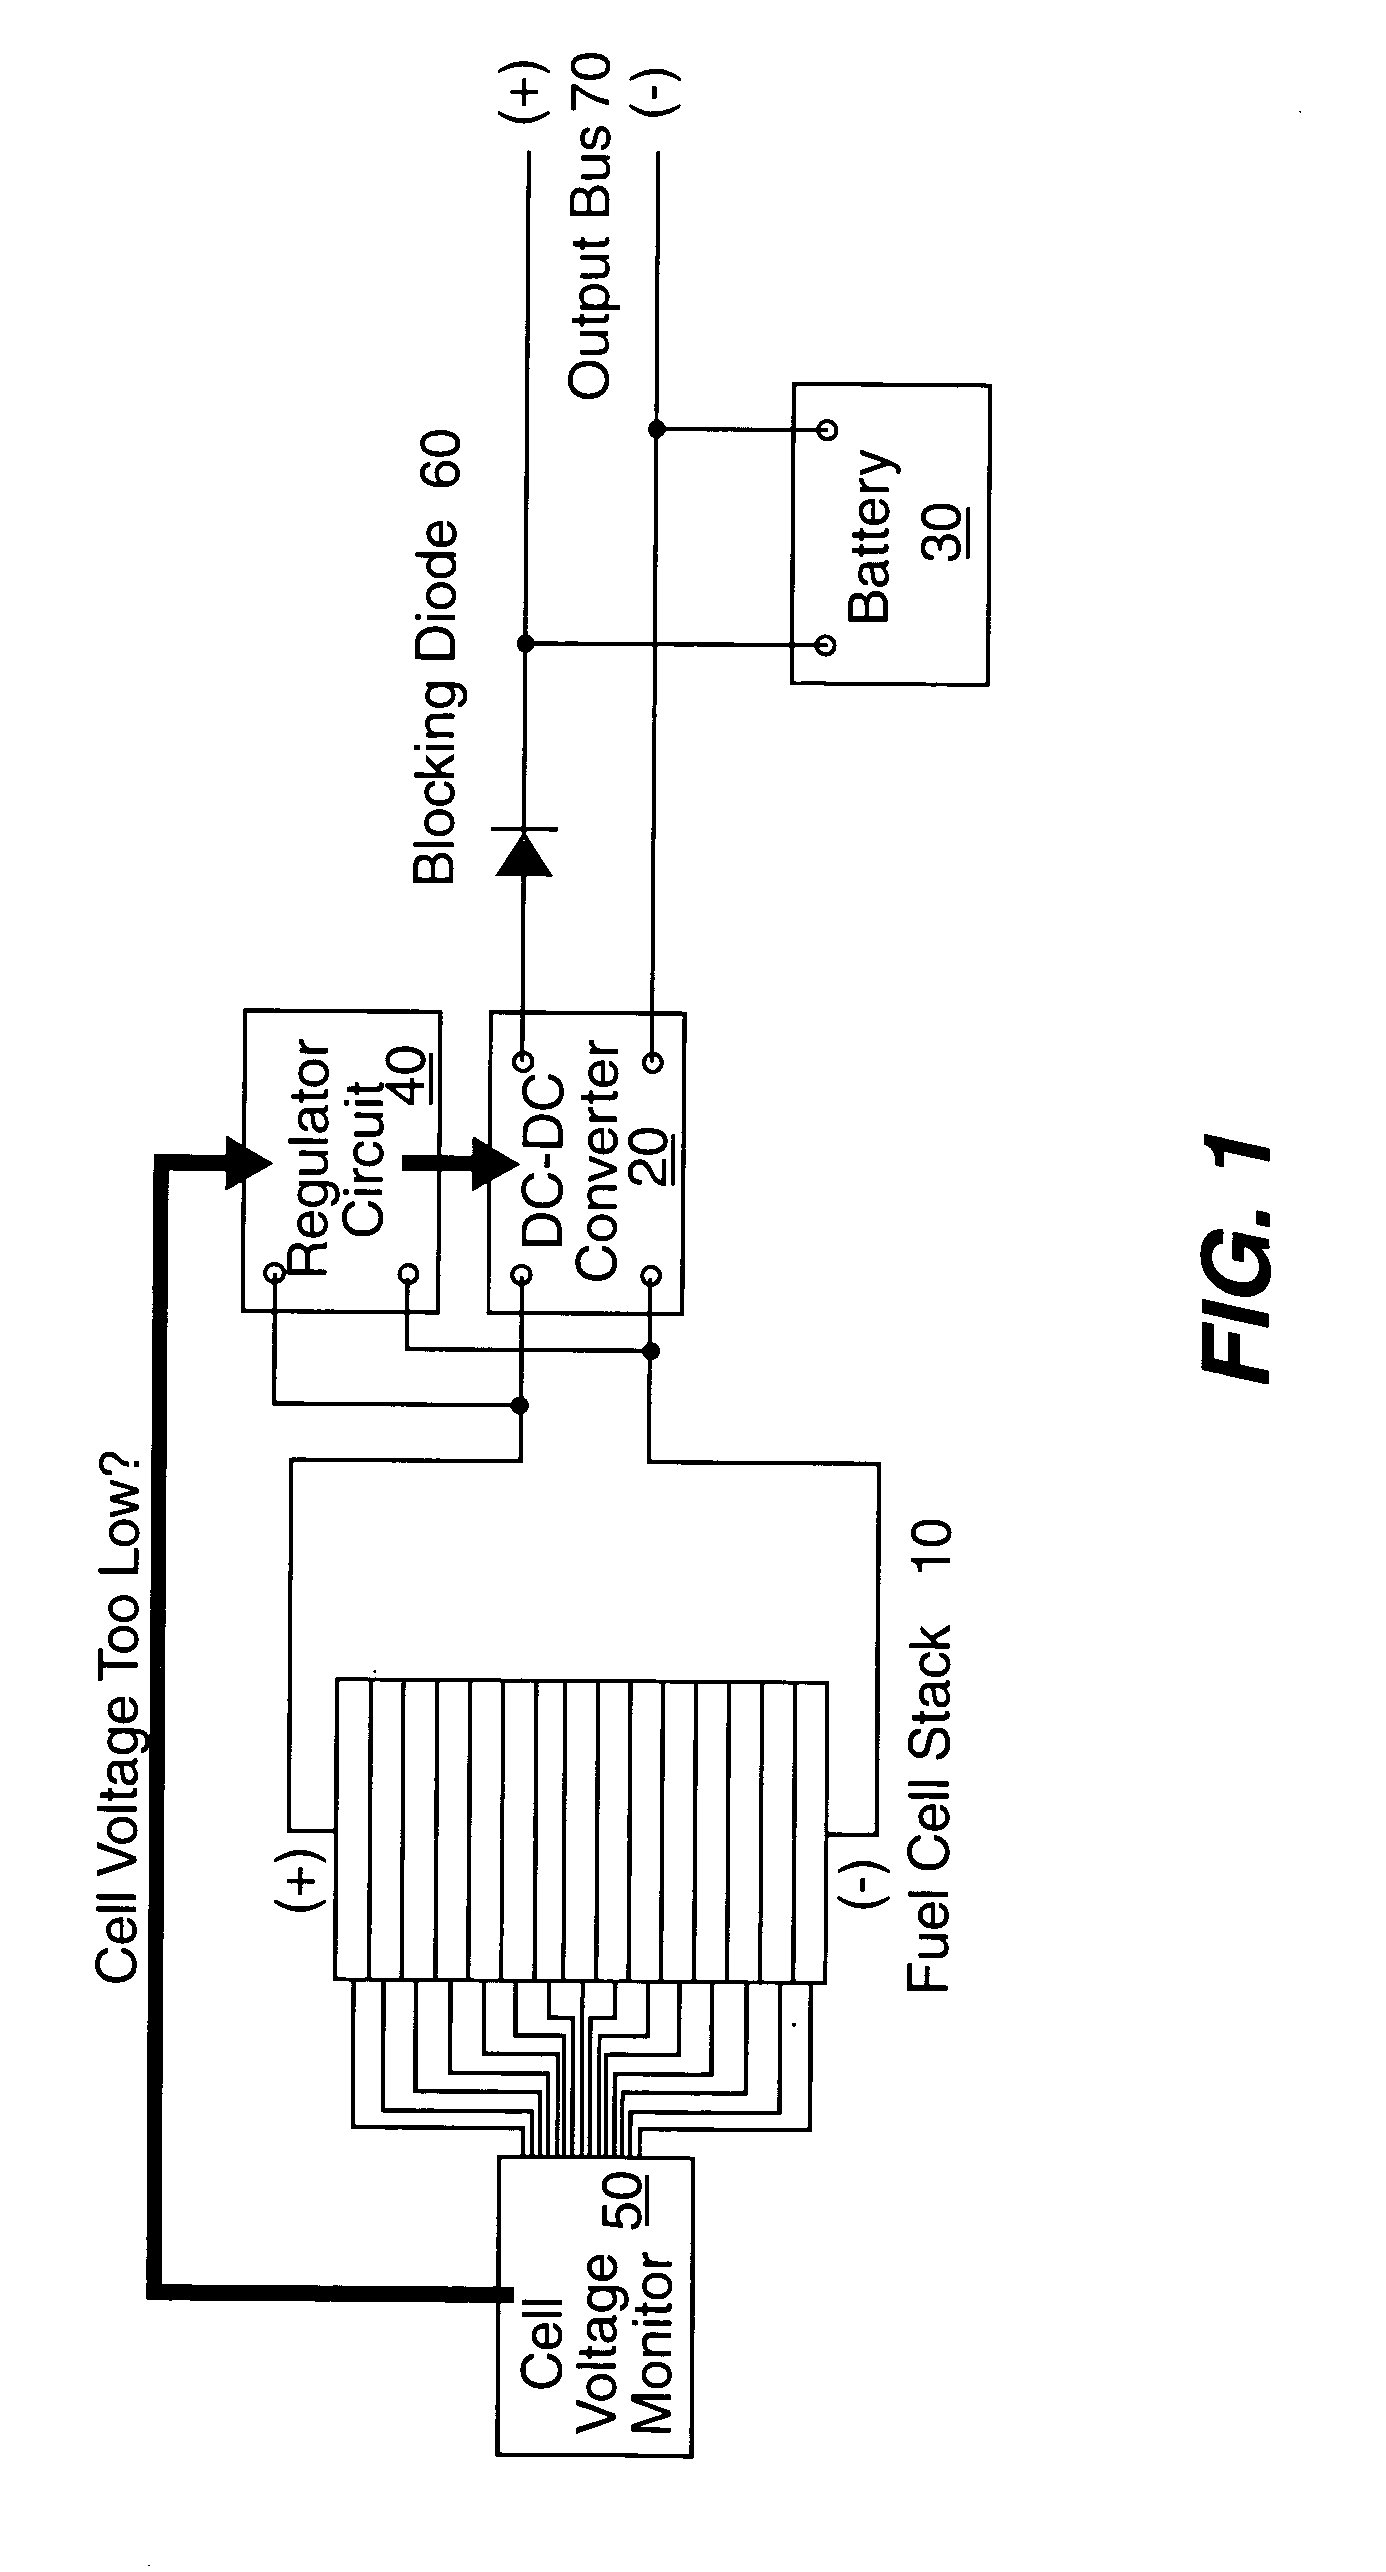 Apparatus and method for regulating hybrid fuel cell power system output